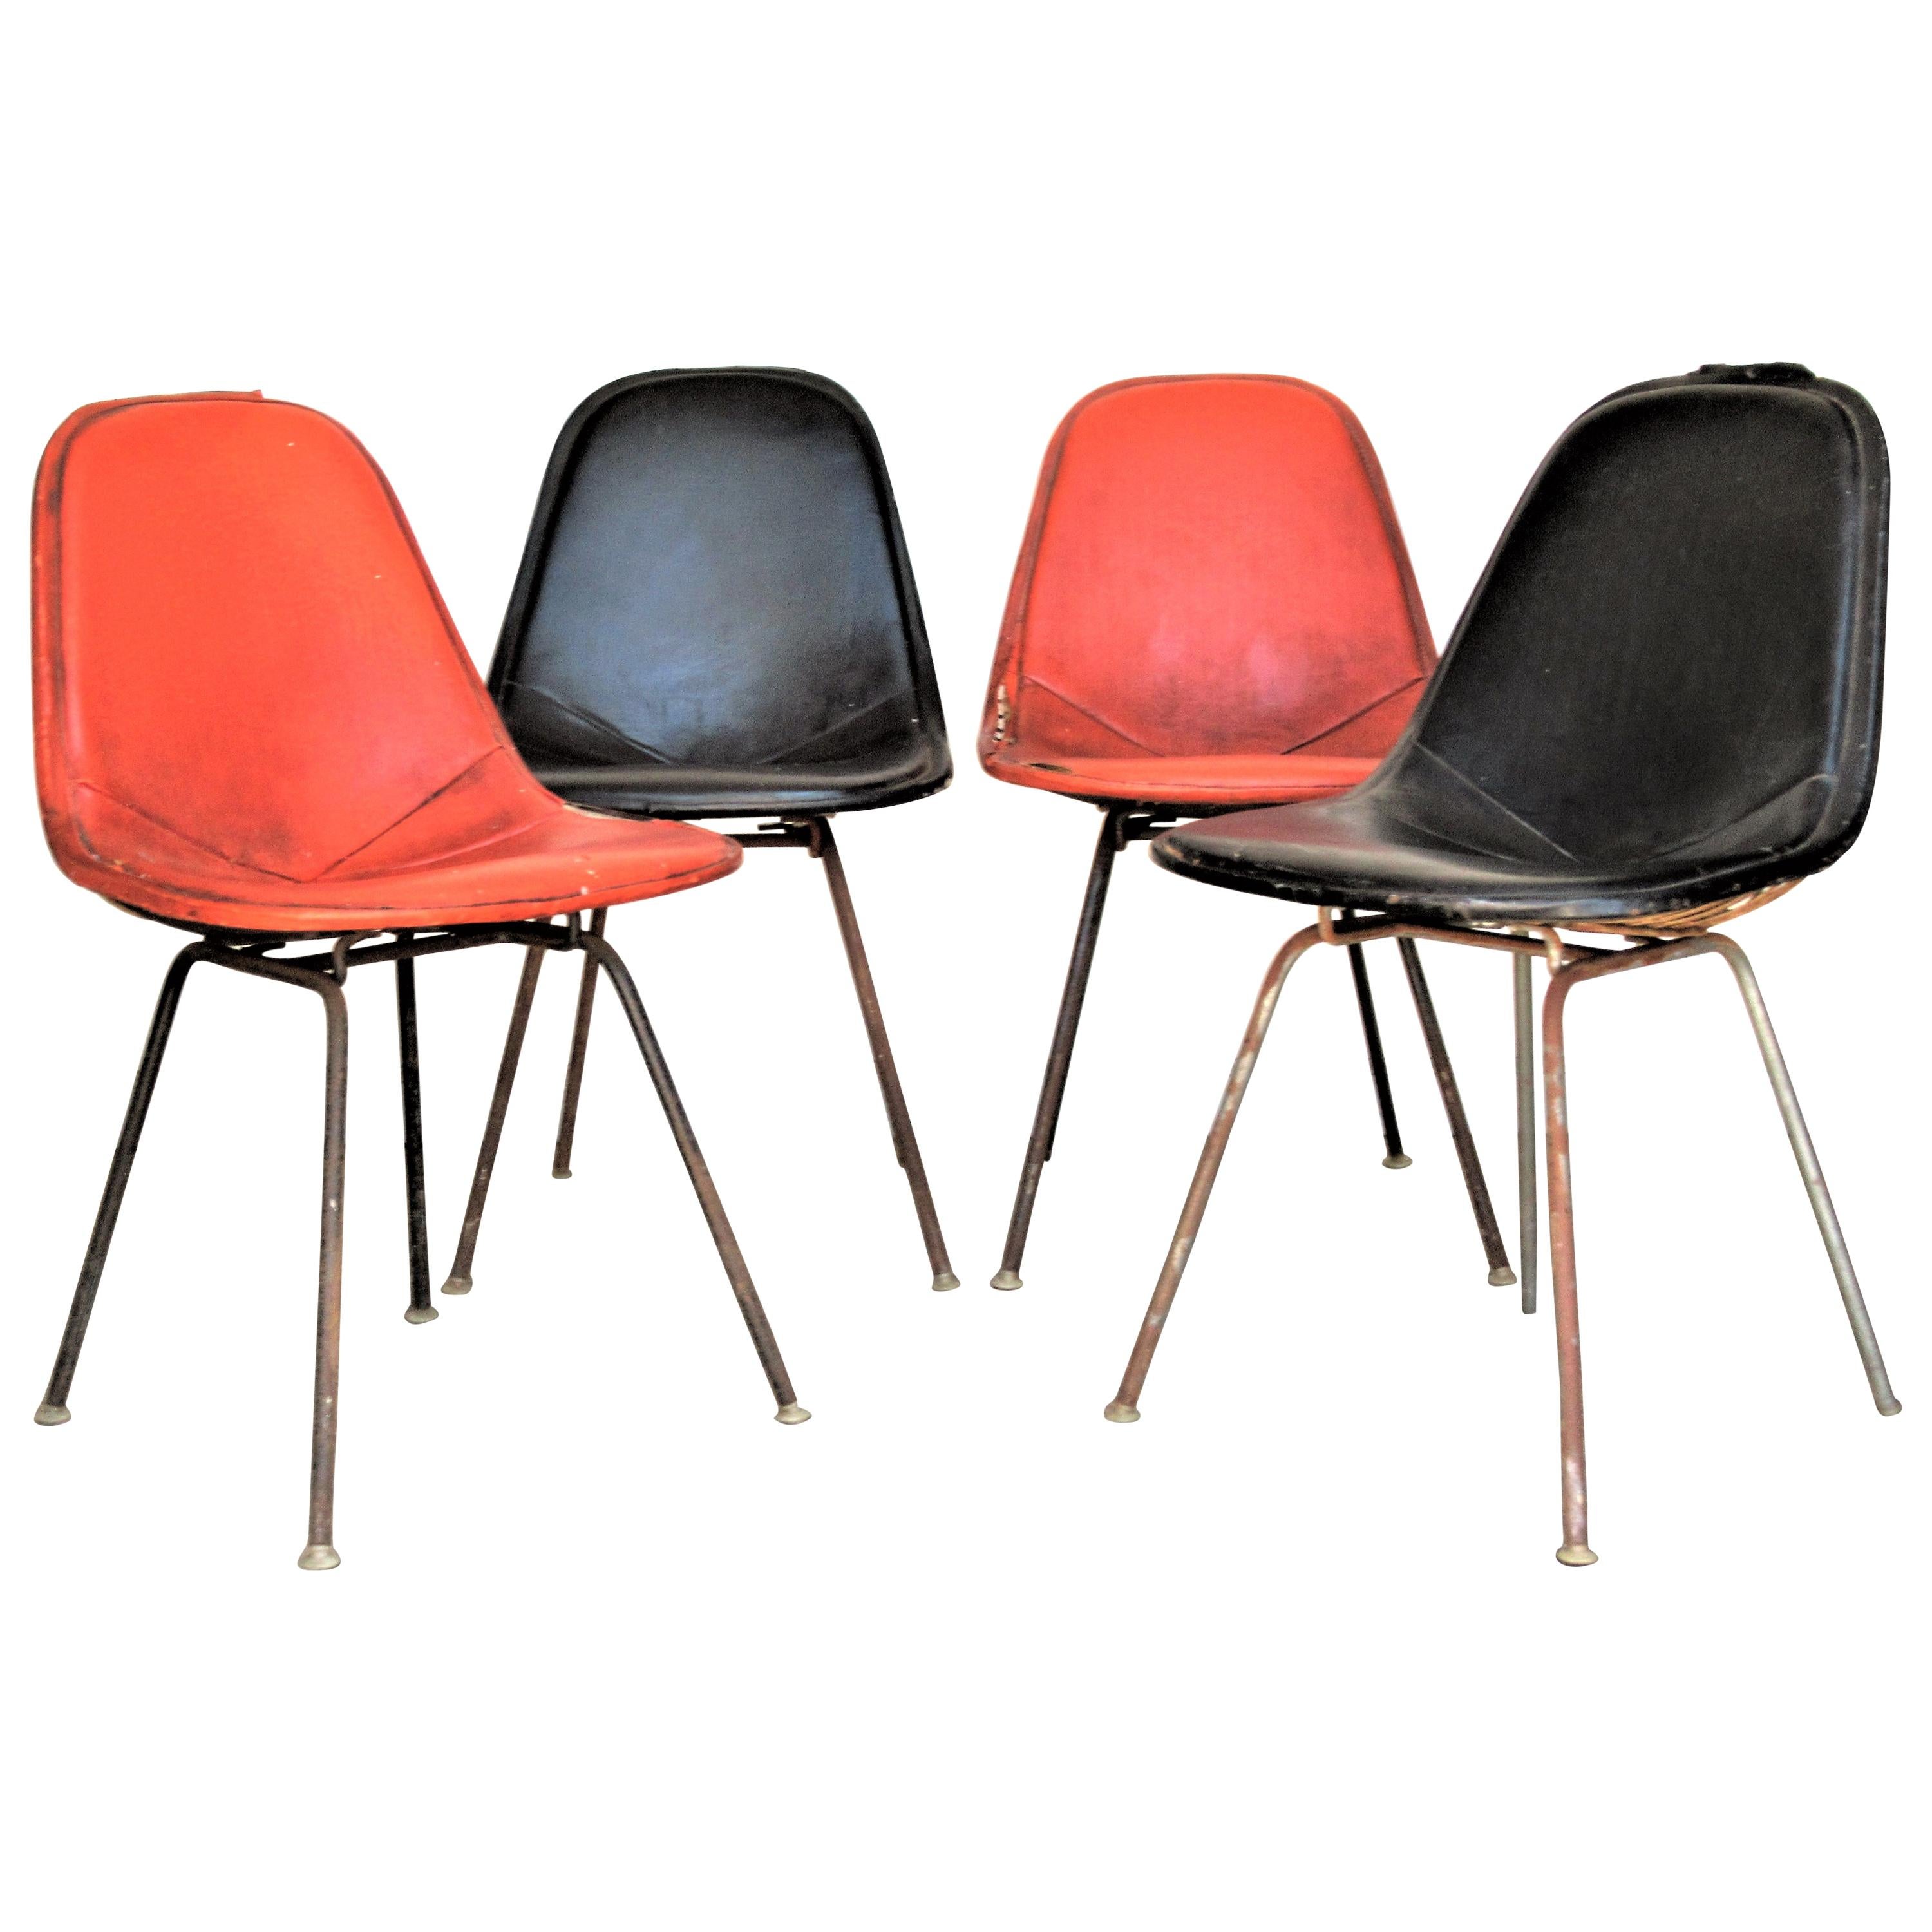 Eames DKX 1 Chairs for Herman Miller